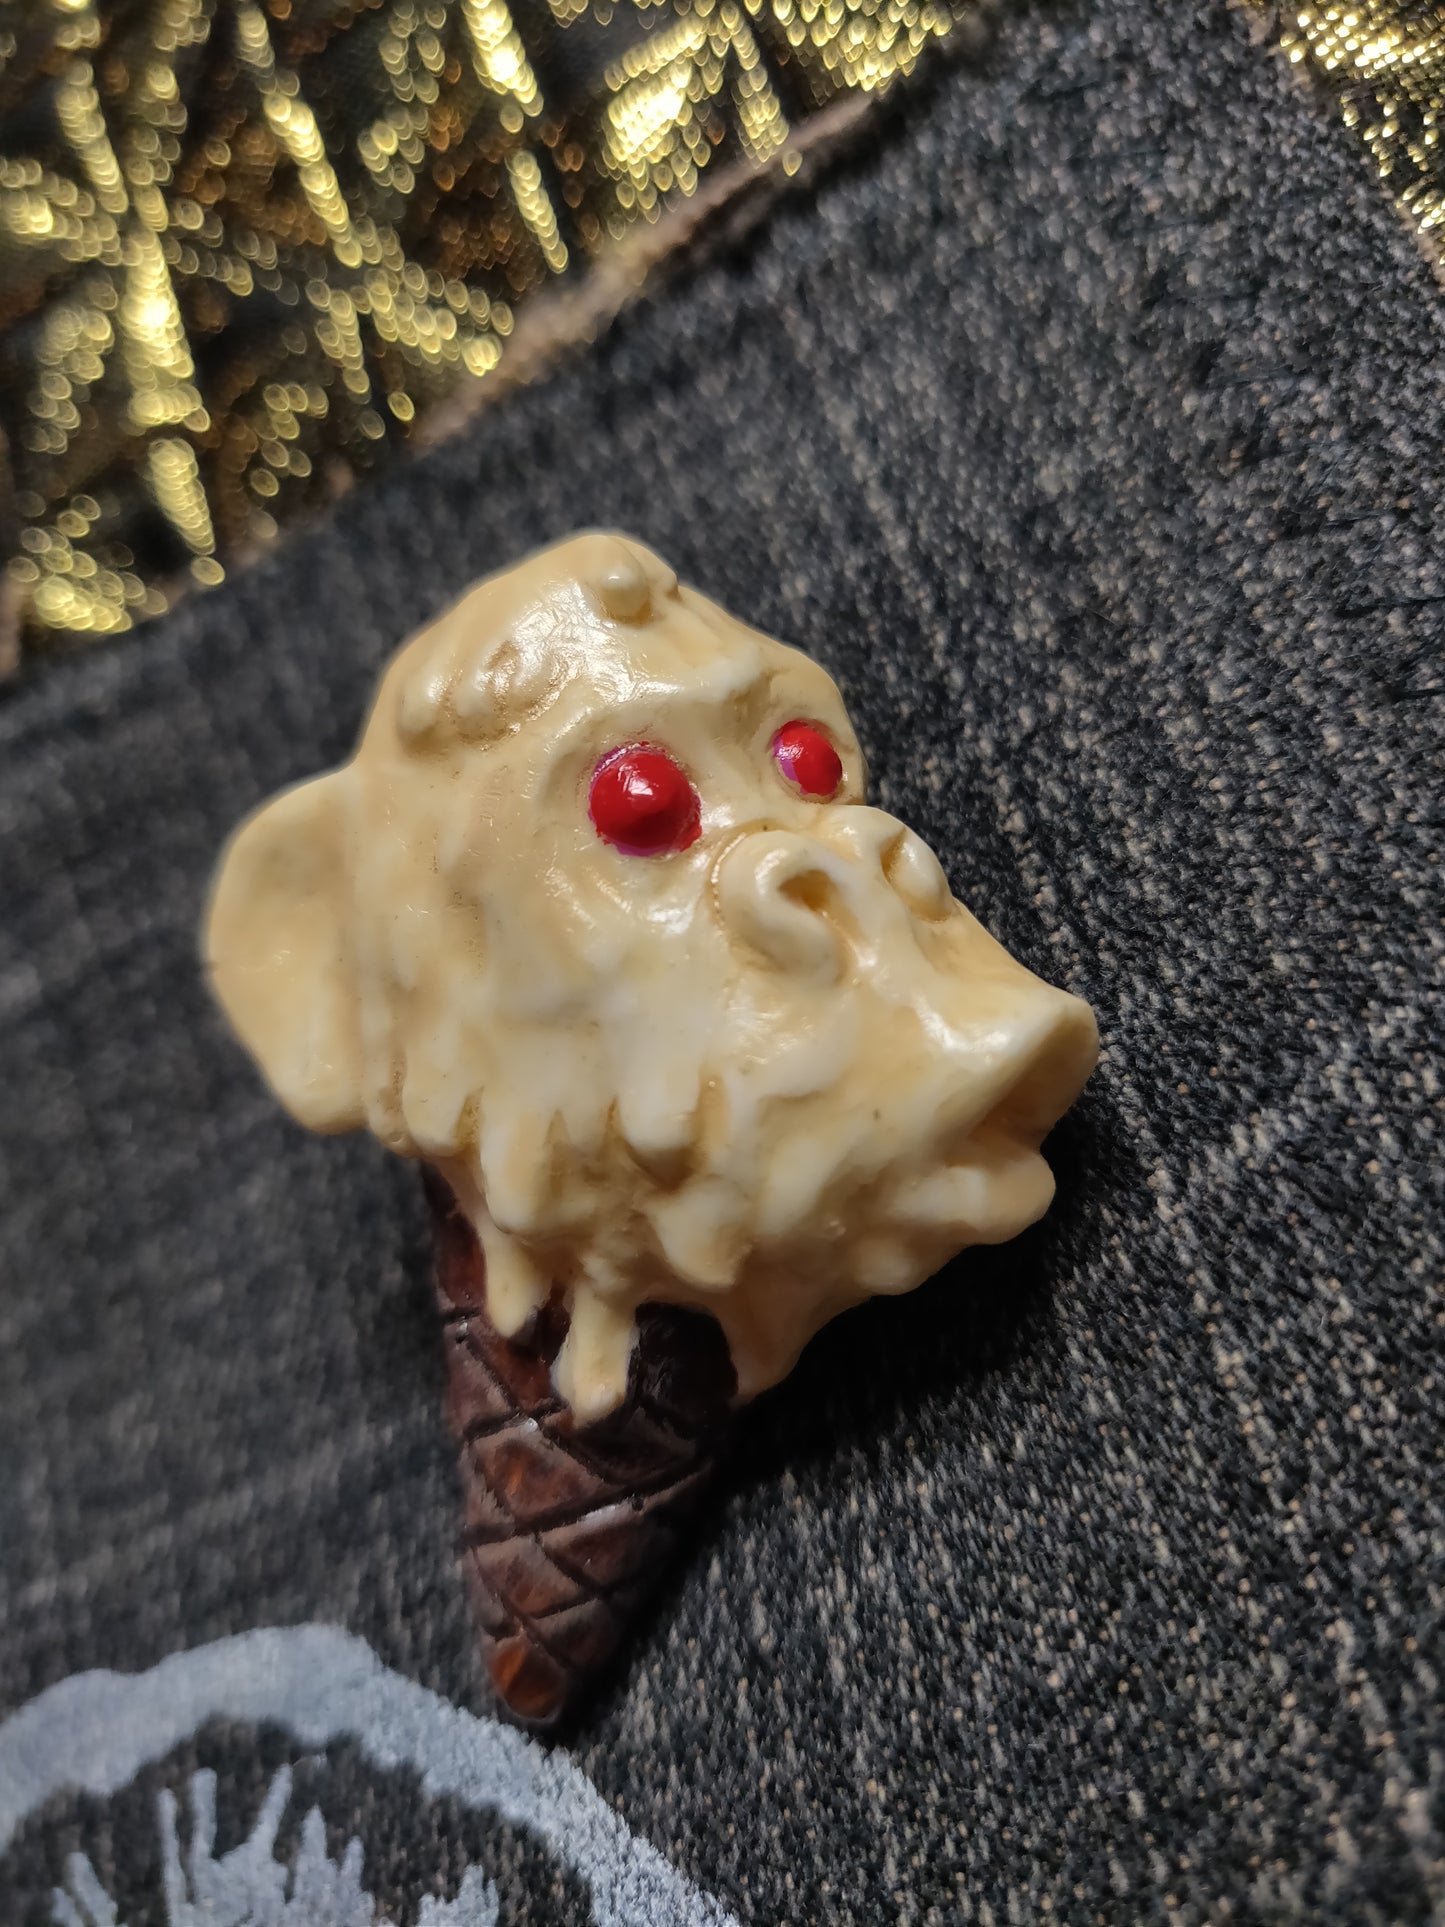 Monkey Ice Cream Cone Hand-sculpted PINS